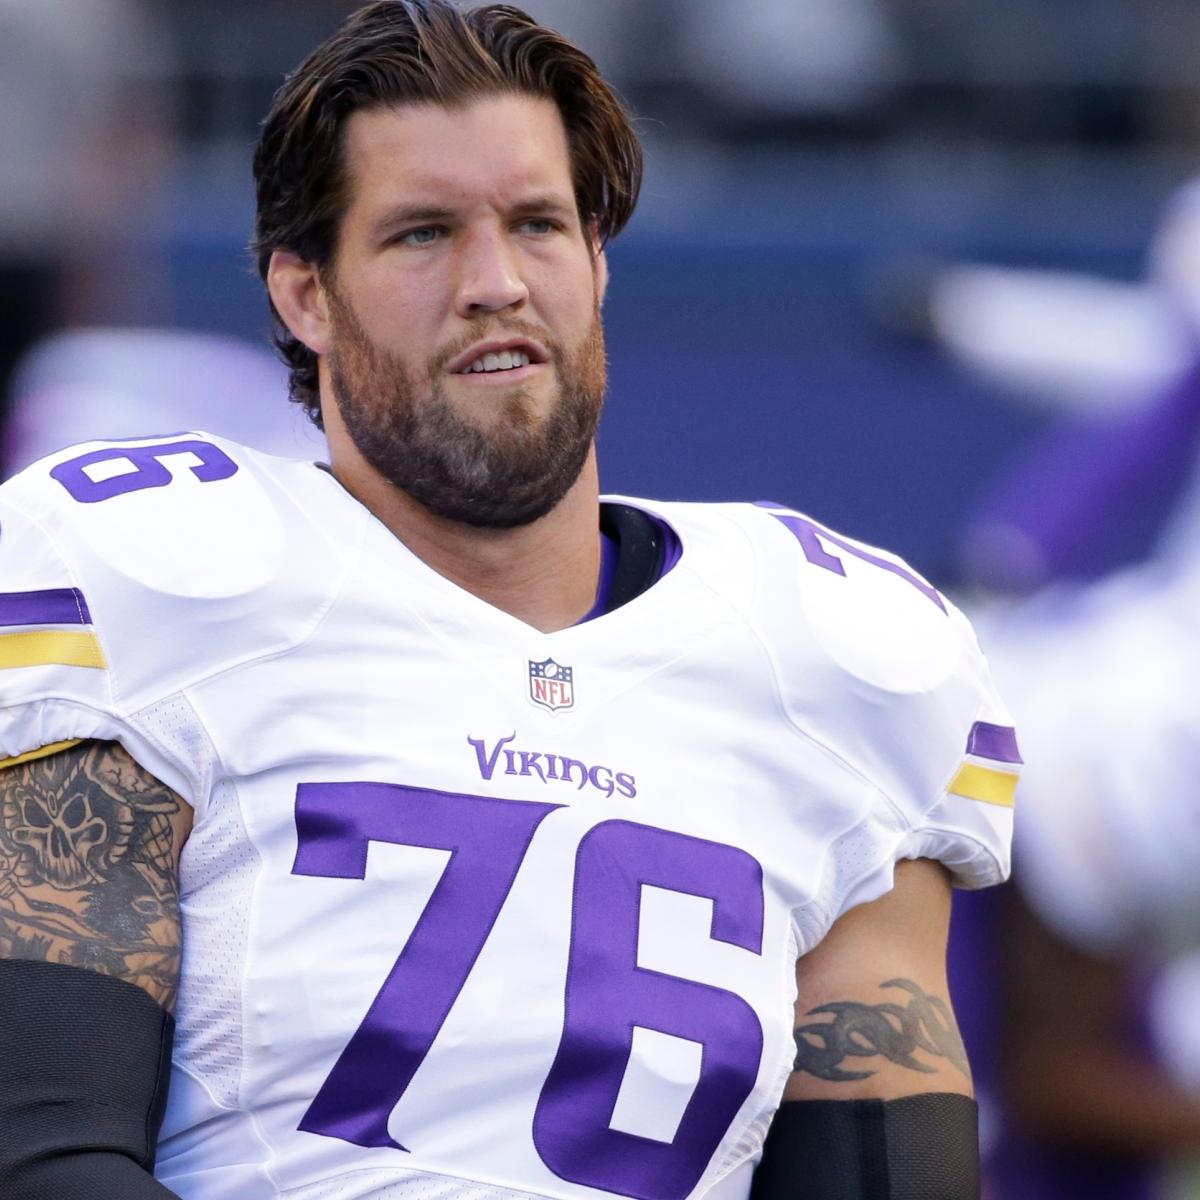 New Team, New Number: Alex Boone Plans to Wear 76